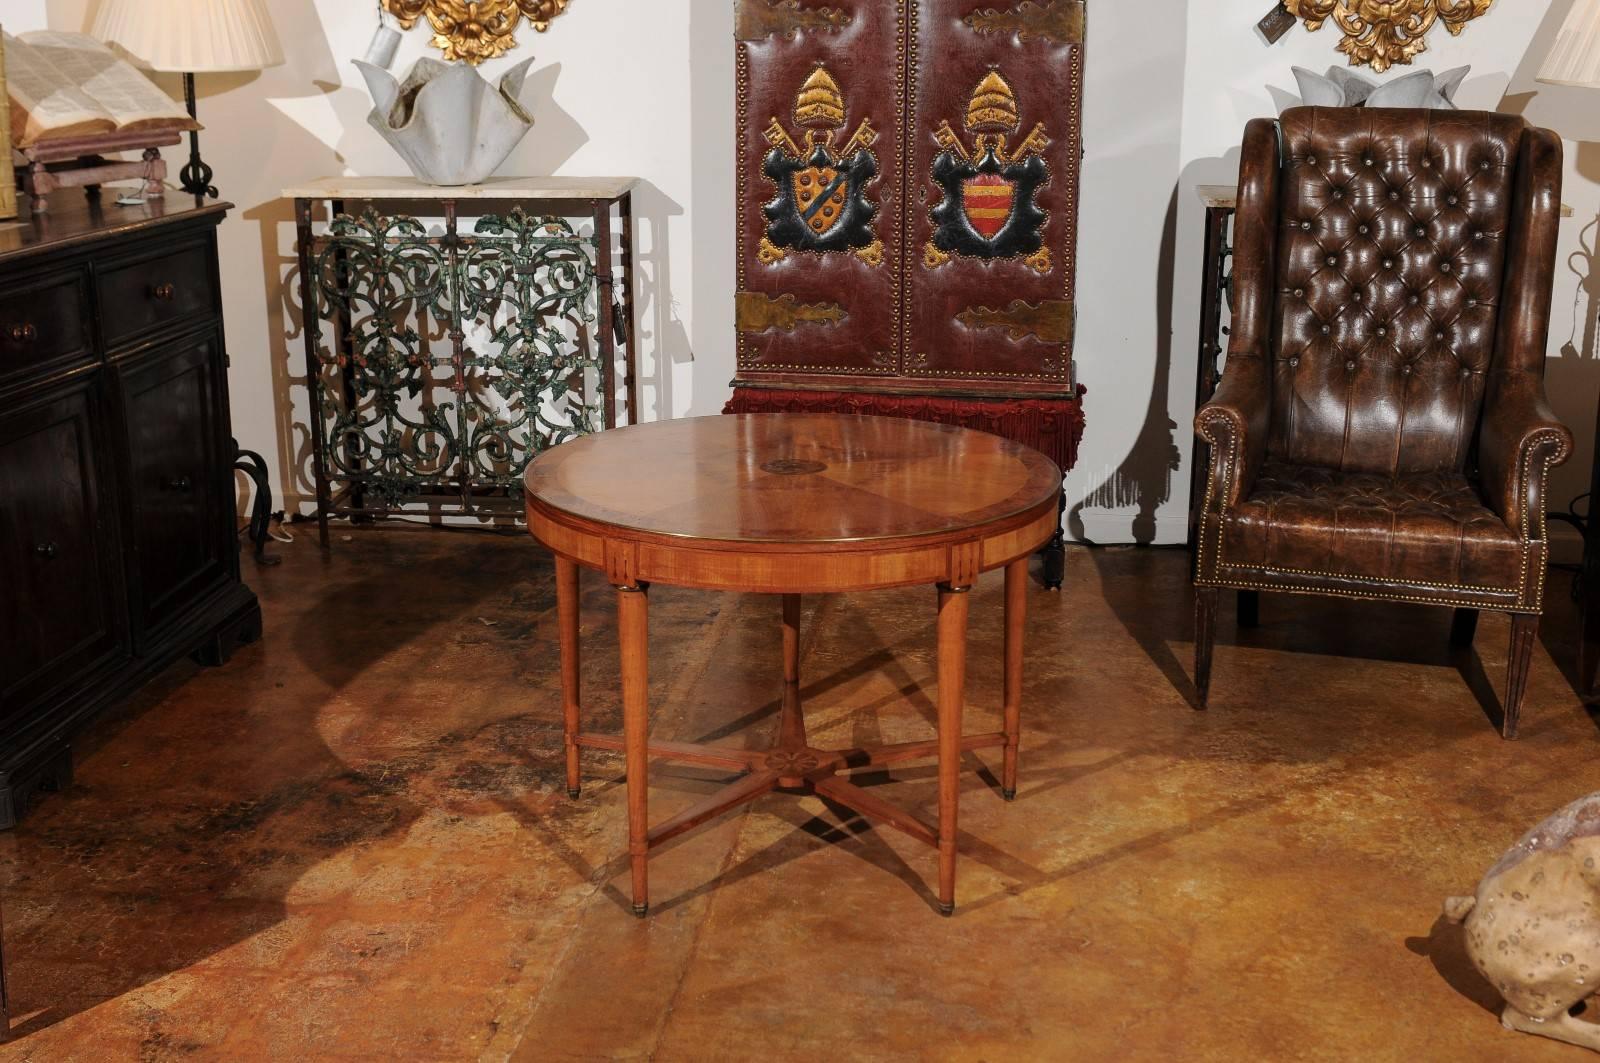 A French round burled walnut inlaid center table with brass trim and cross stretcher from the late 19th century. This French side table was born in the 1880s, a decade after the fall of the Emperor Napoleon III. Featuring an exquisite circular top